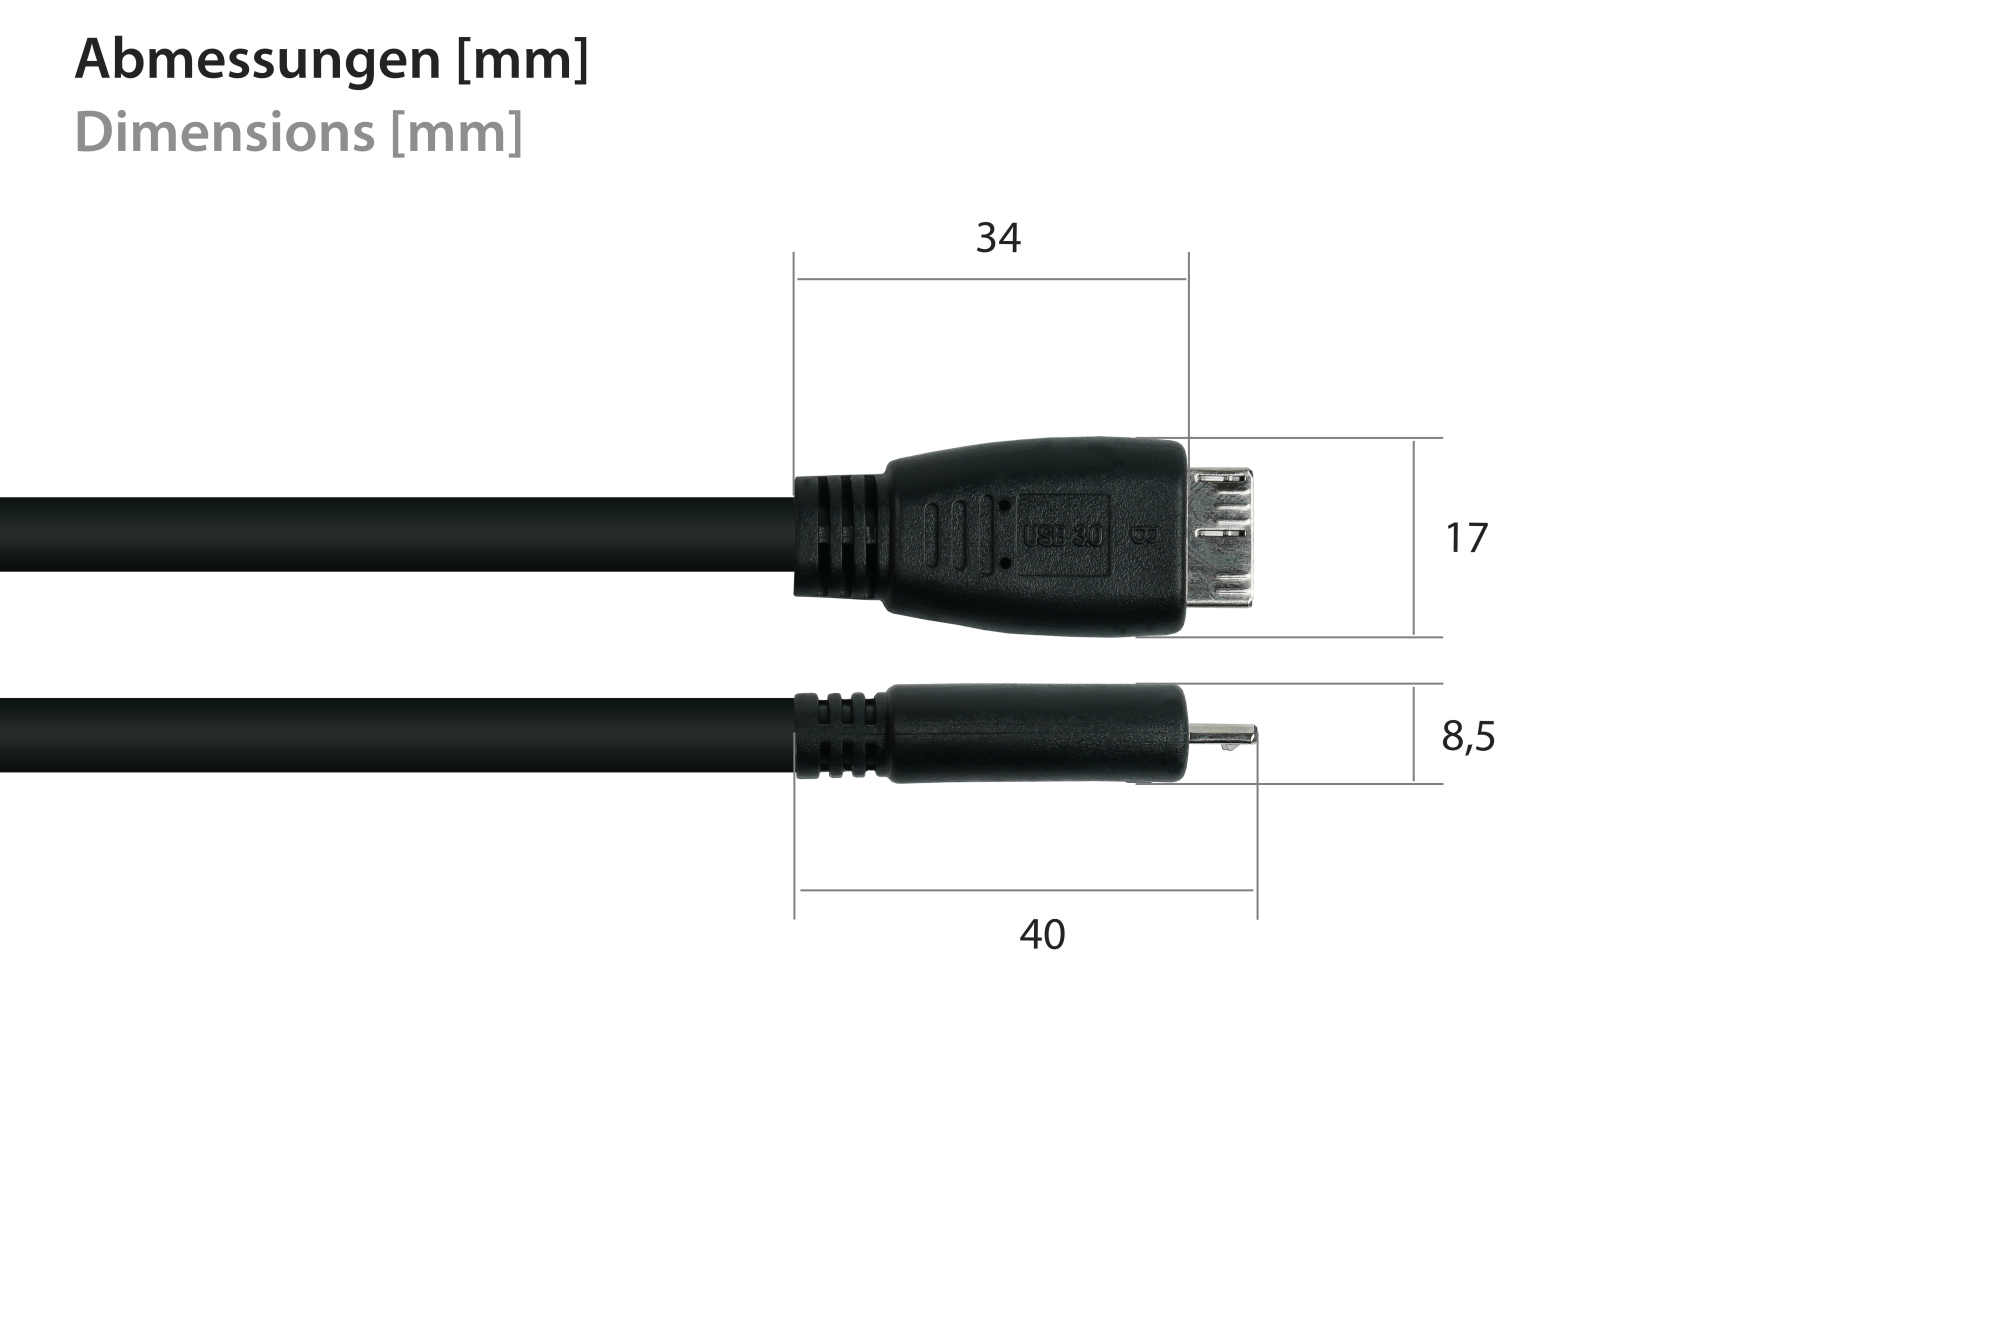 Premium Cord USB - Micro USB Connection Cable 5 m, USB A Male to Micro B  Male, USB 2.0 High Speed Data Cable, 5 Pins, 2X Shielded, AWG28, Colour